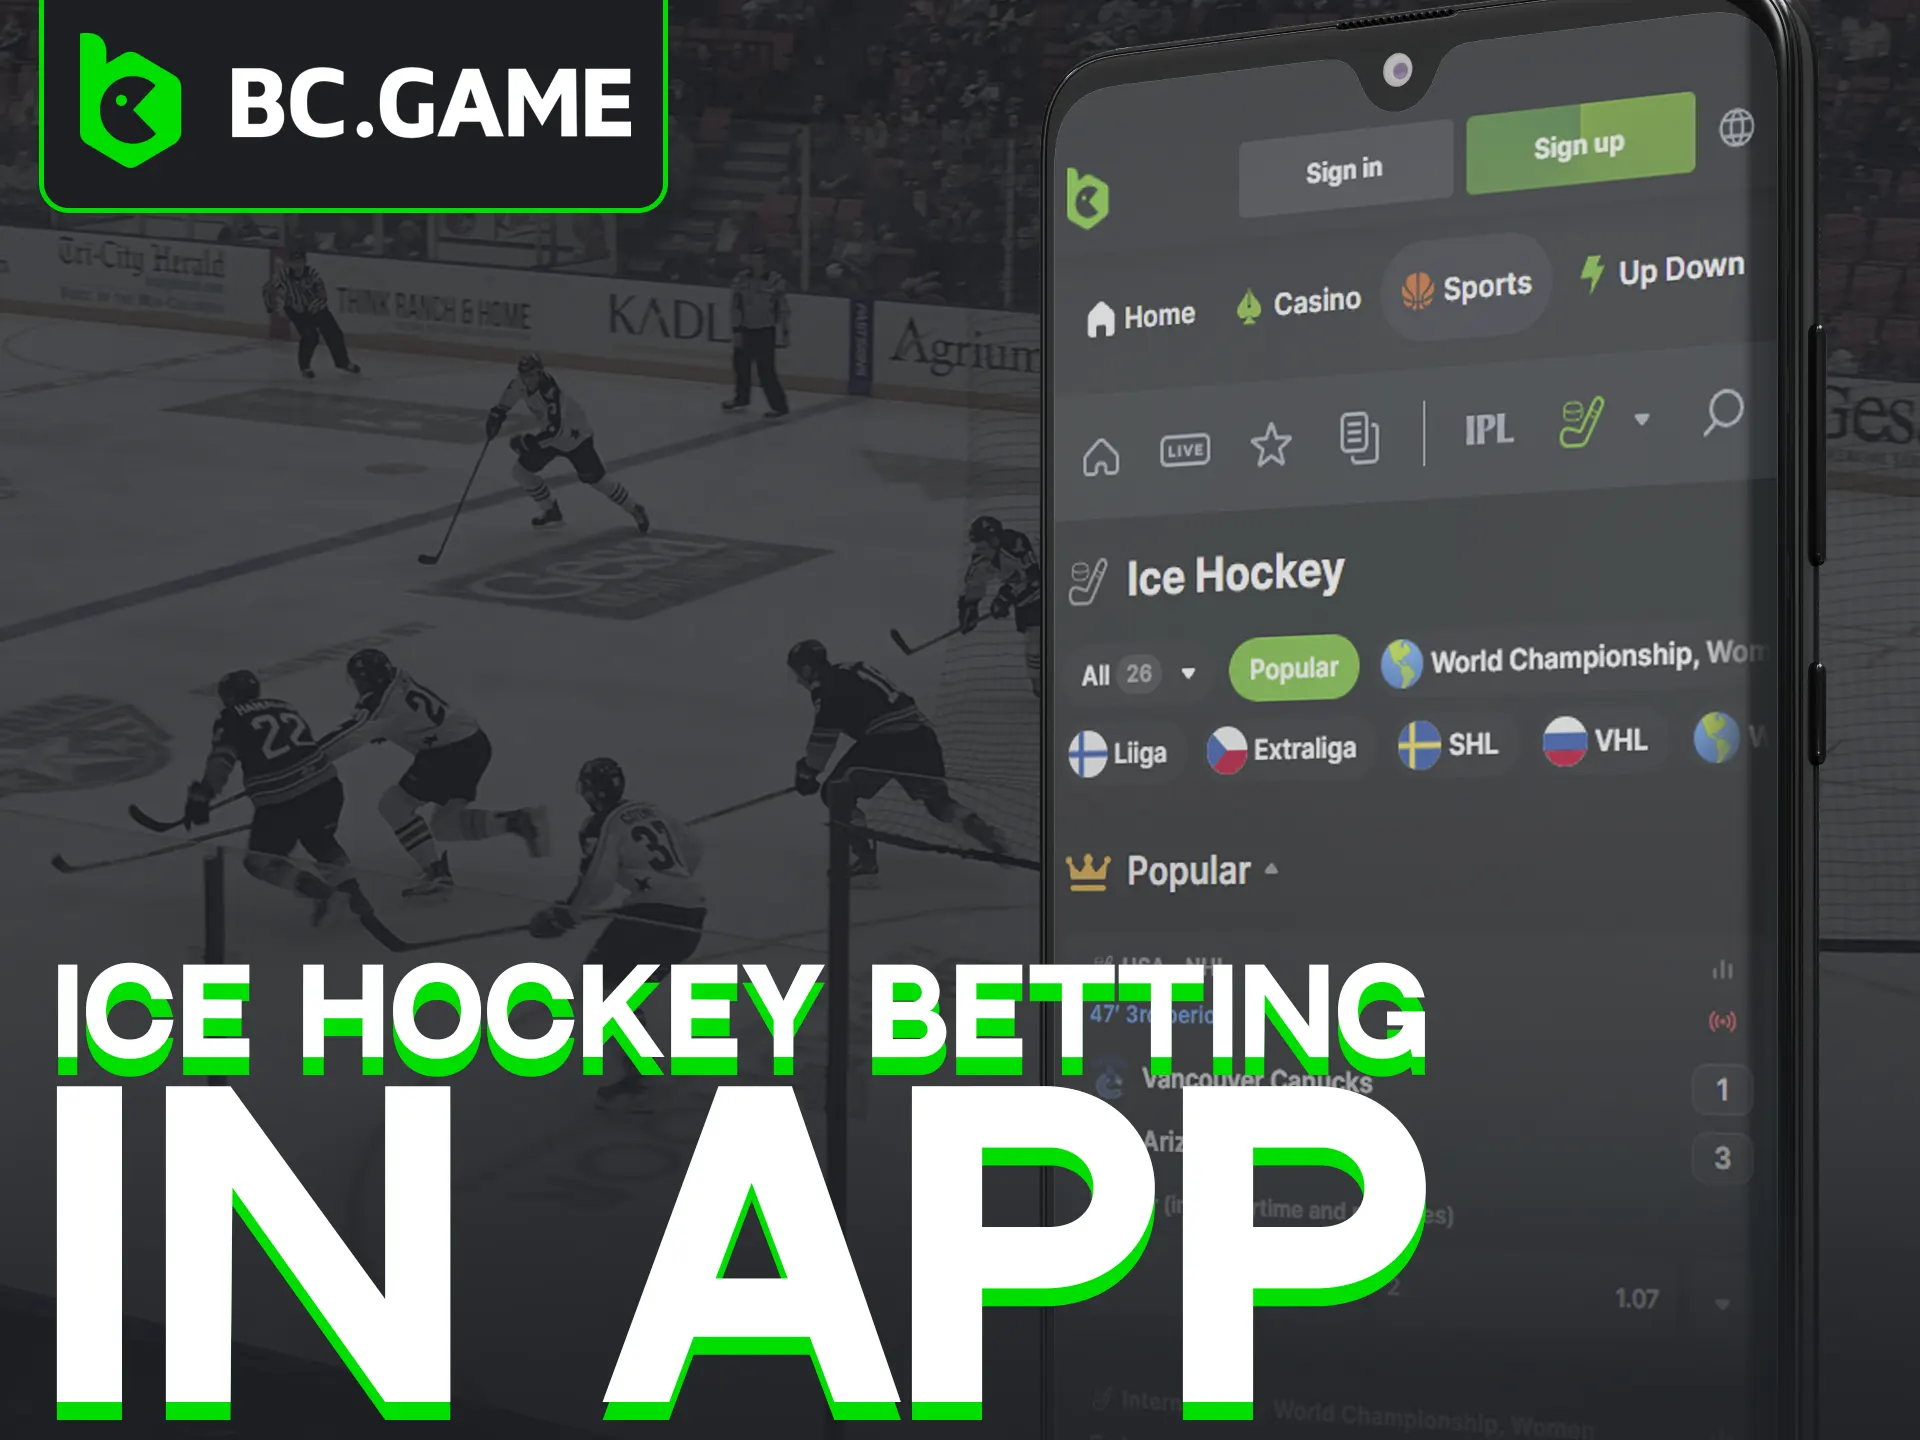 Bet on hockey easily with BC Game's mobile app.